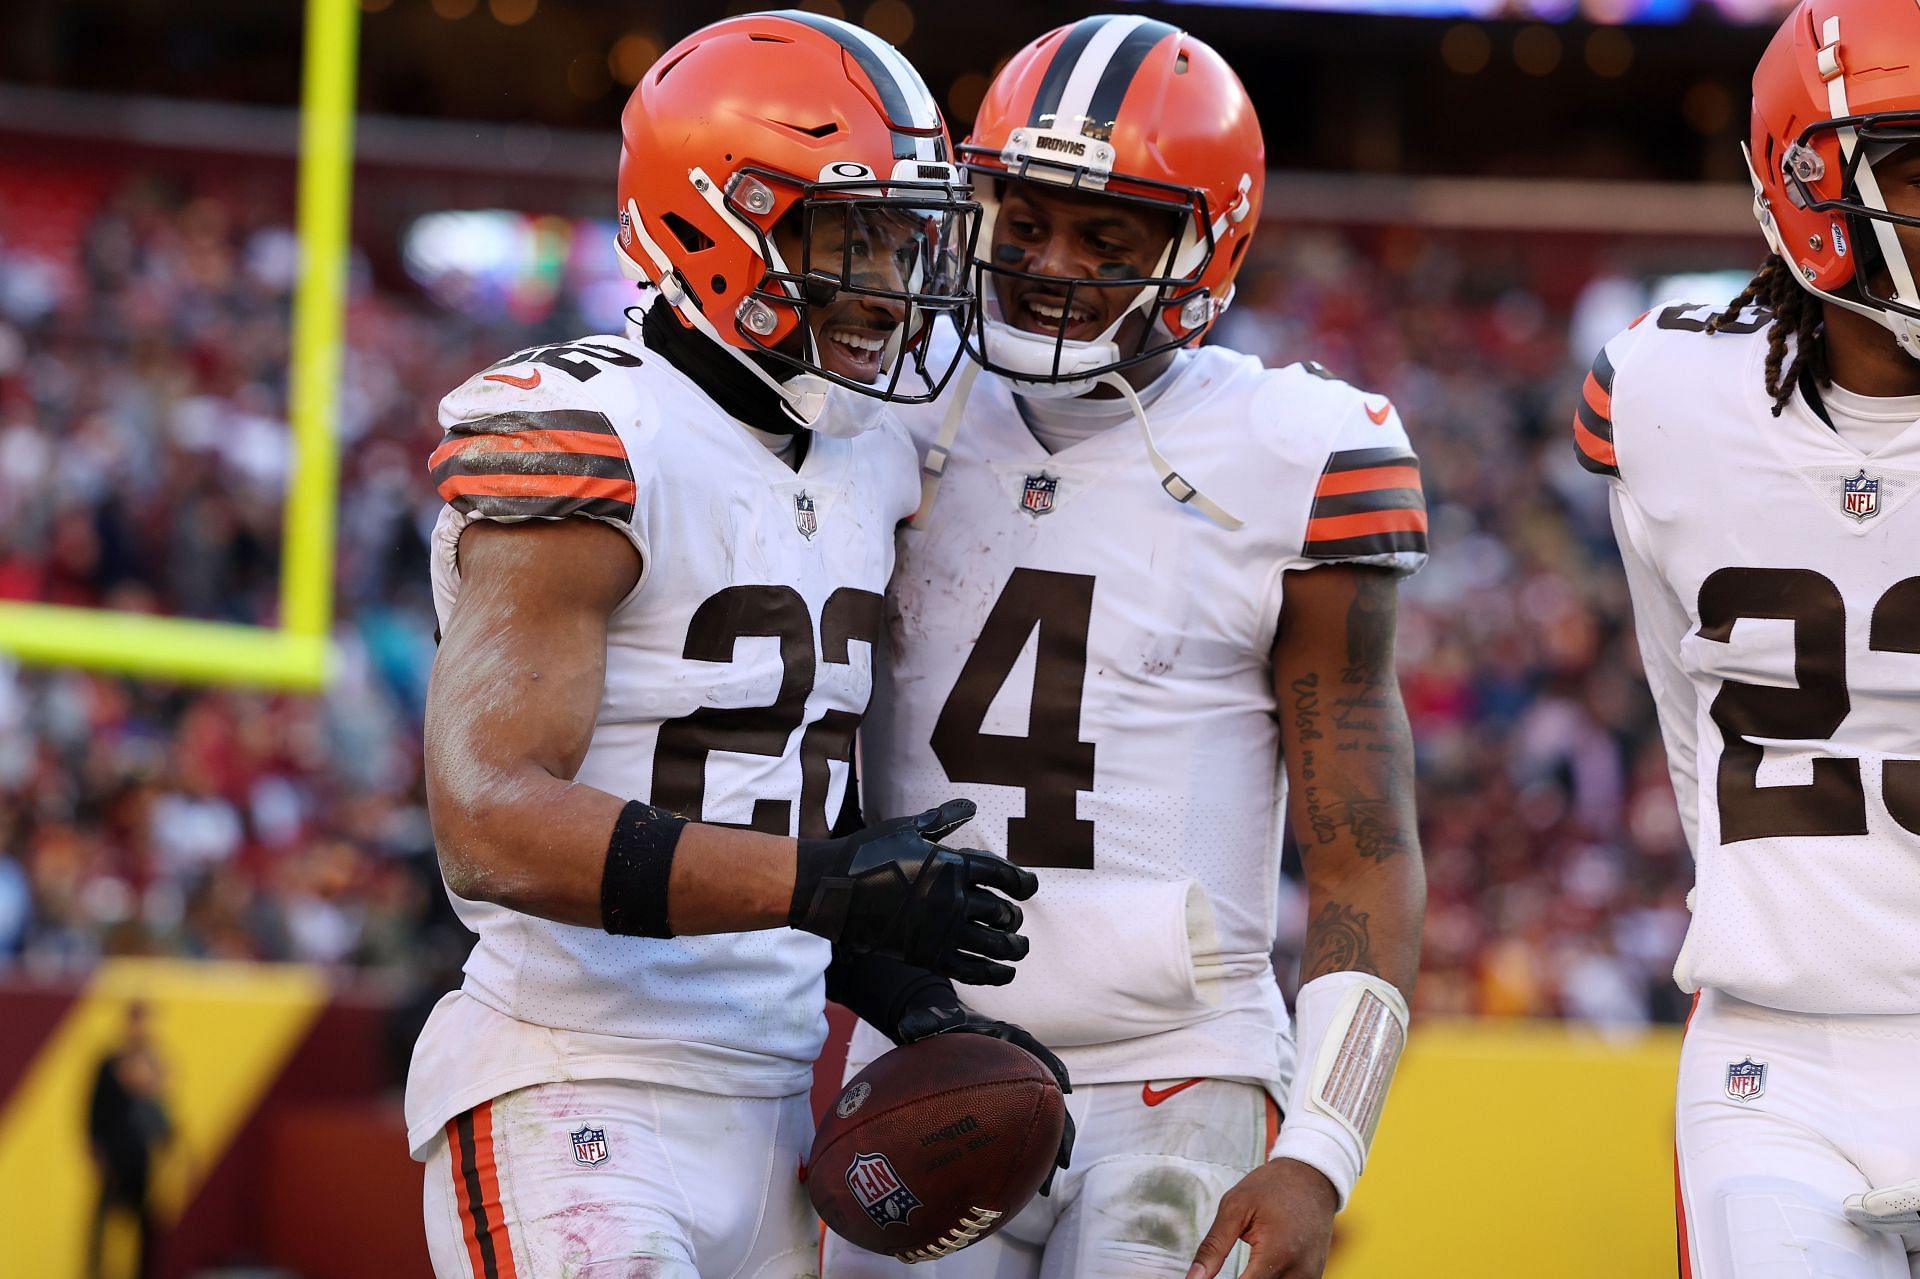 2023 NFL Draft: Top 3 needs for the Cleveland Browns